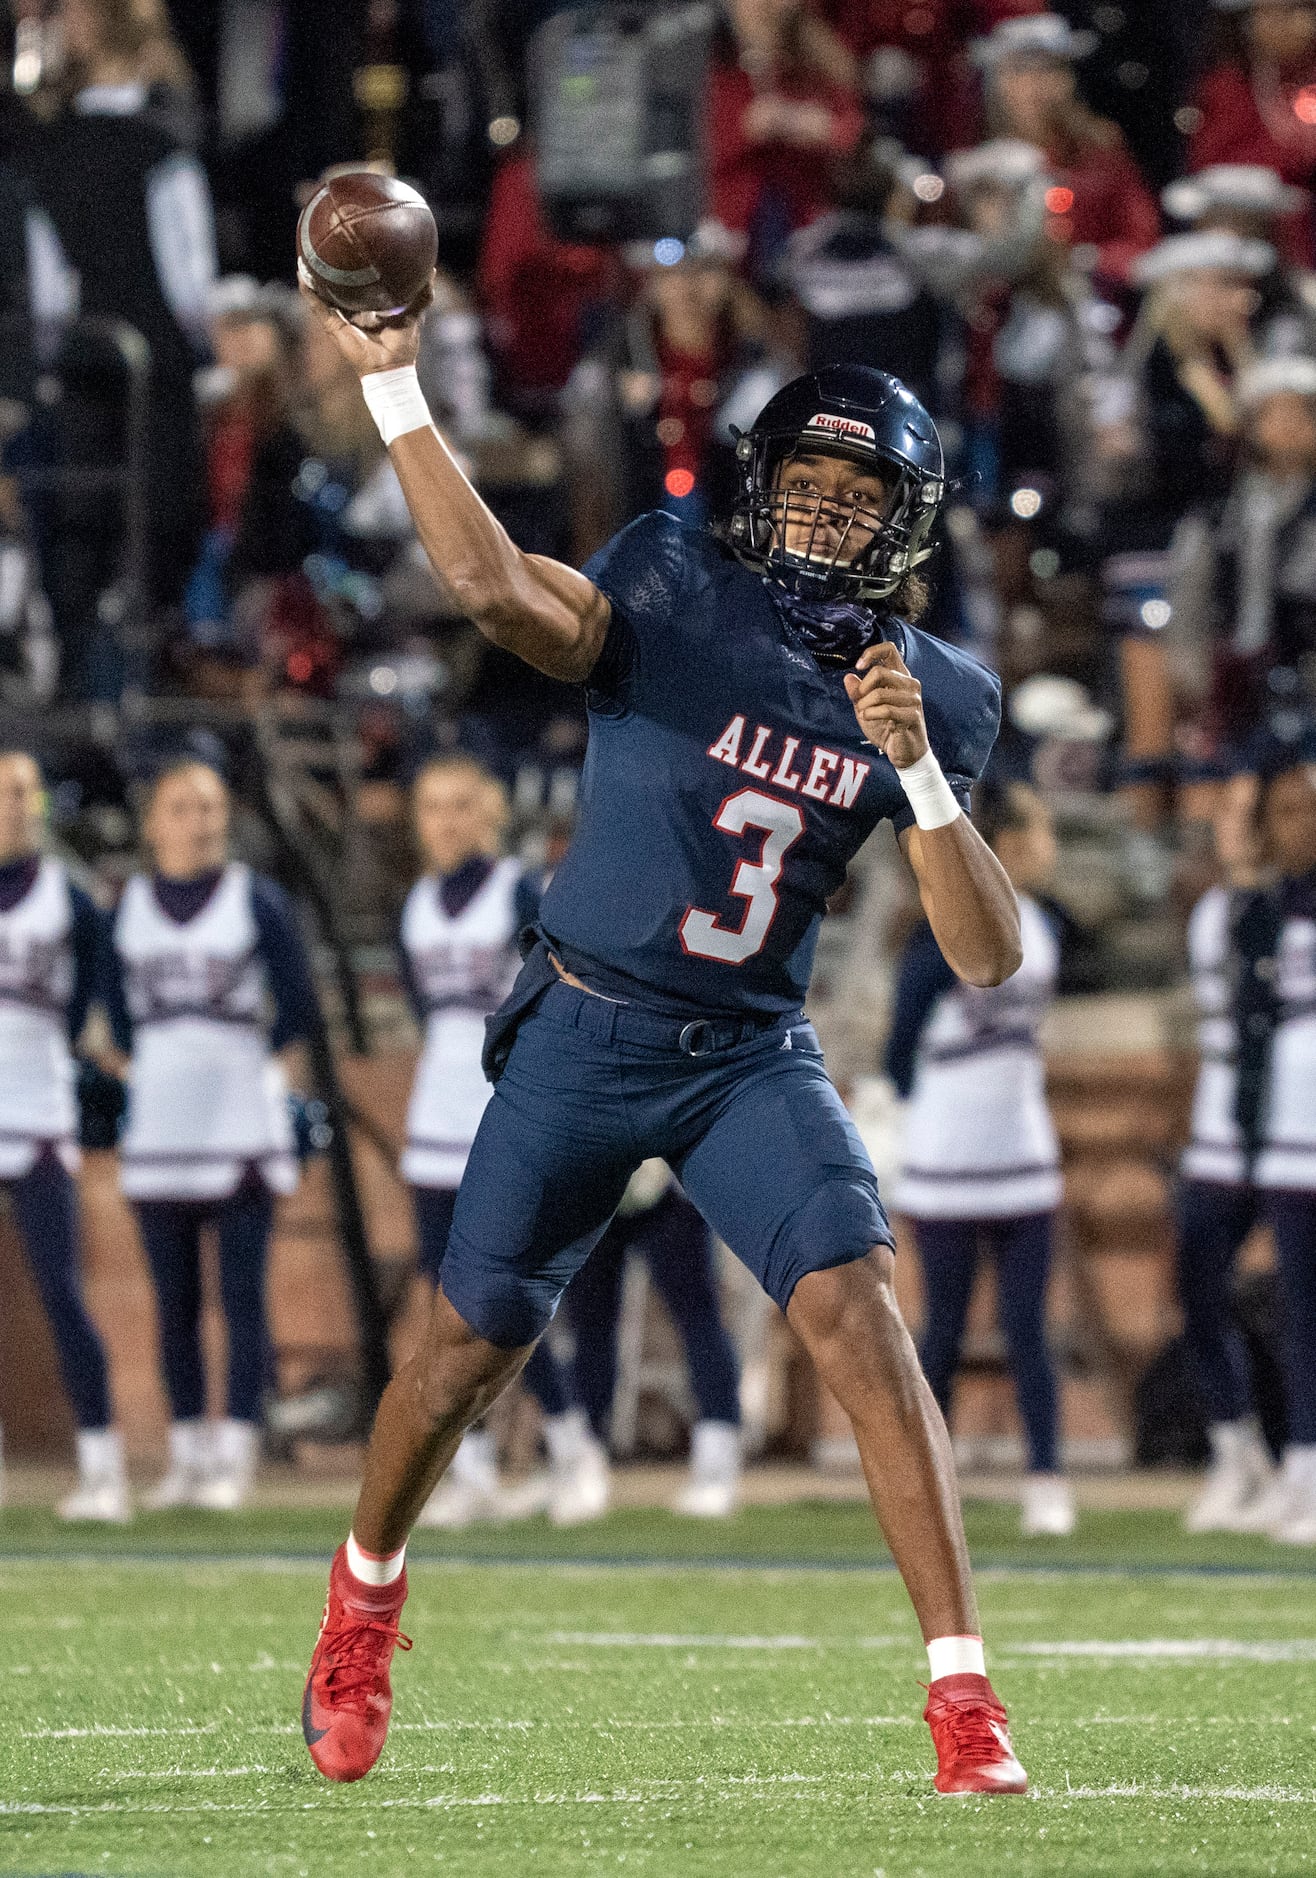 Allen sophomore quarterback Mike Hawkins (3) throws a pass during the first half of a...